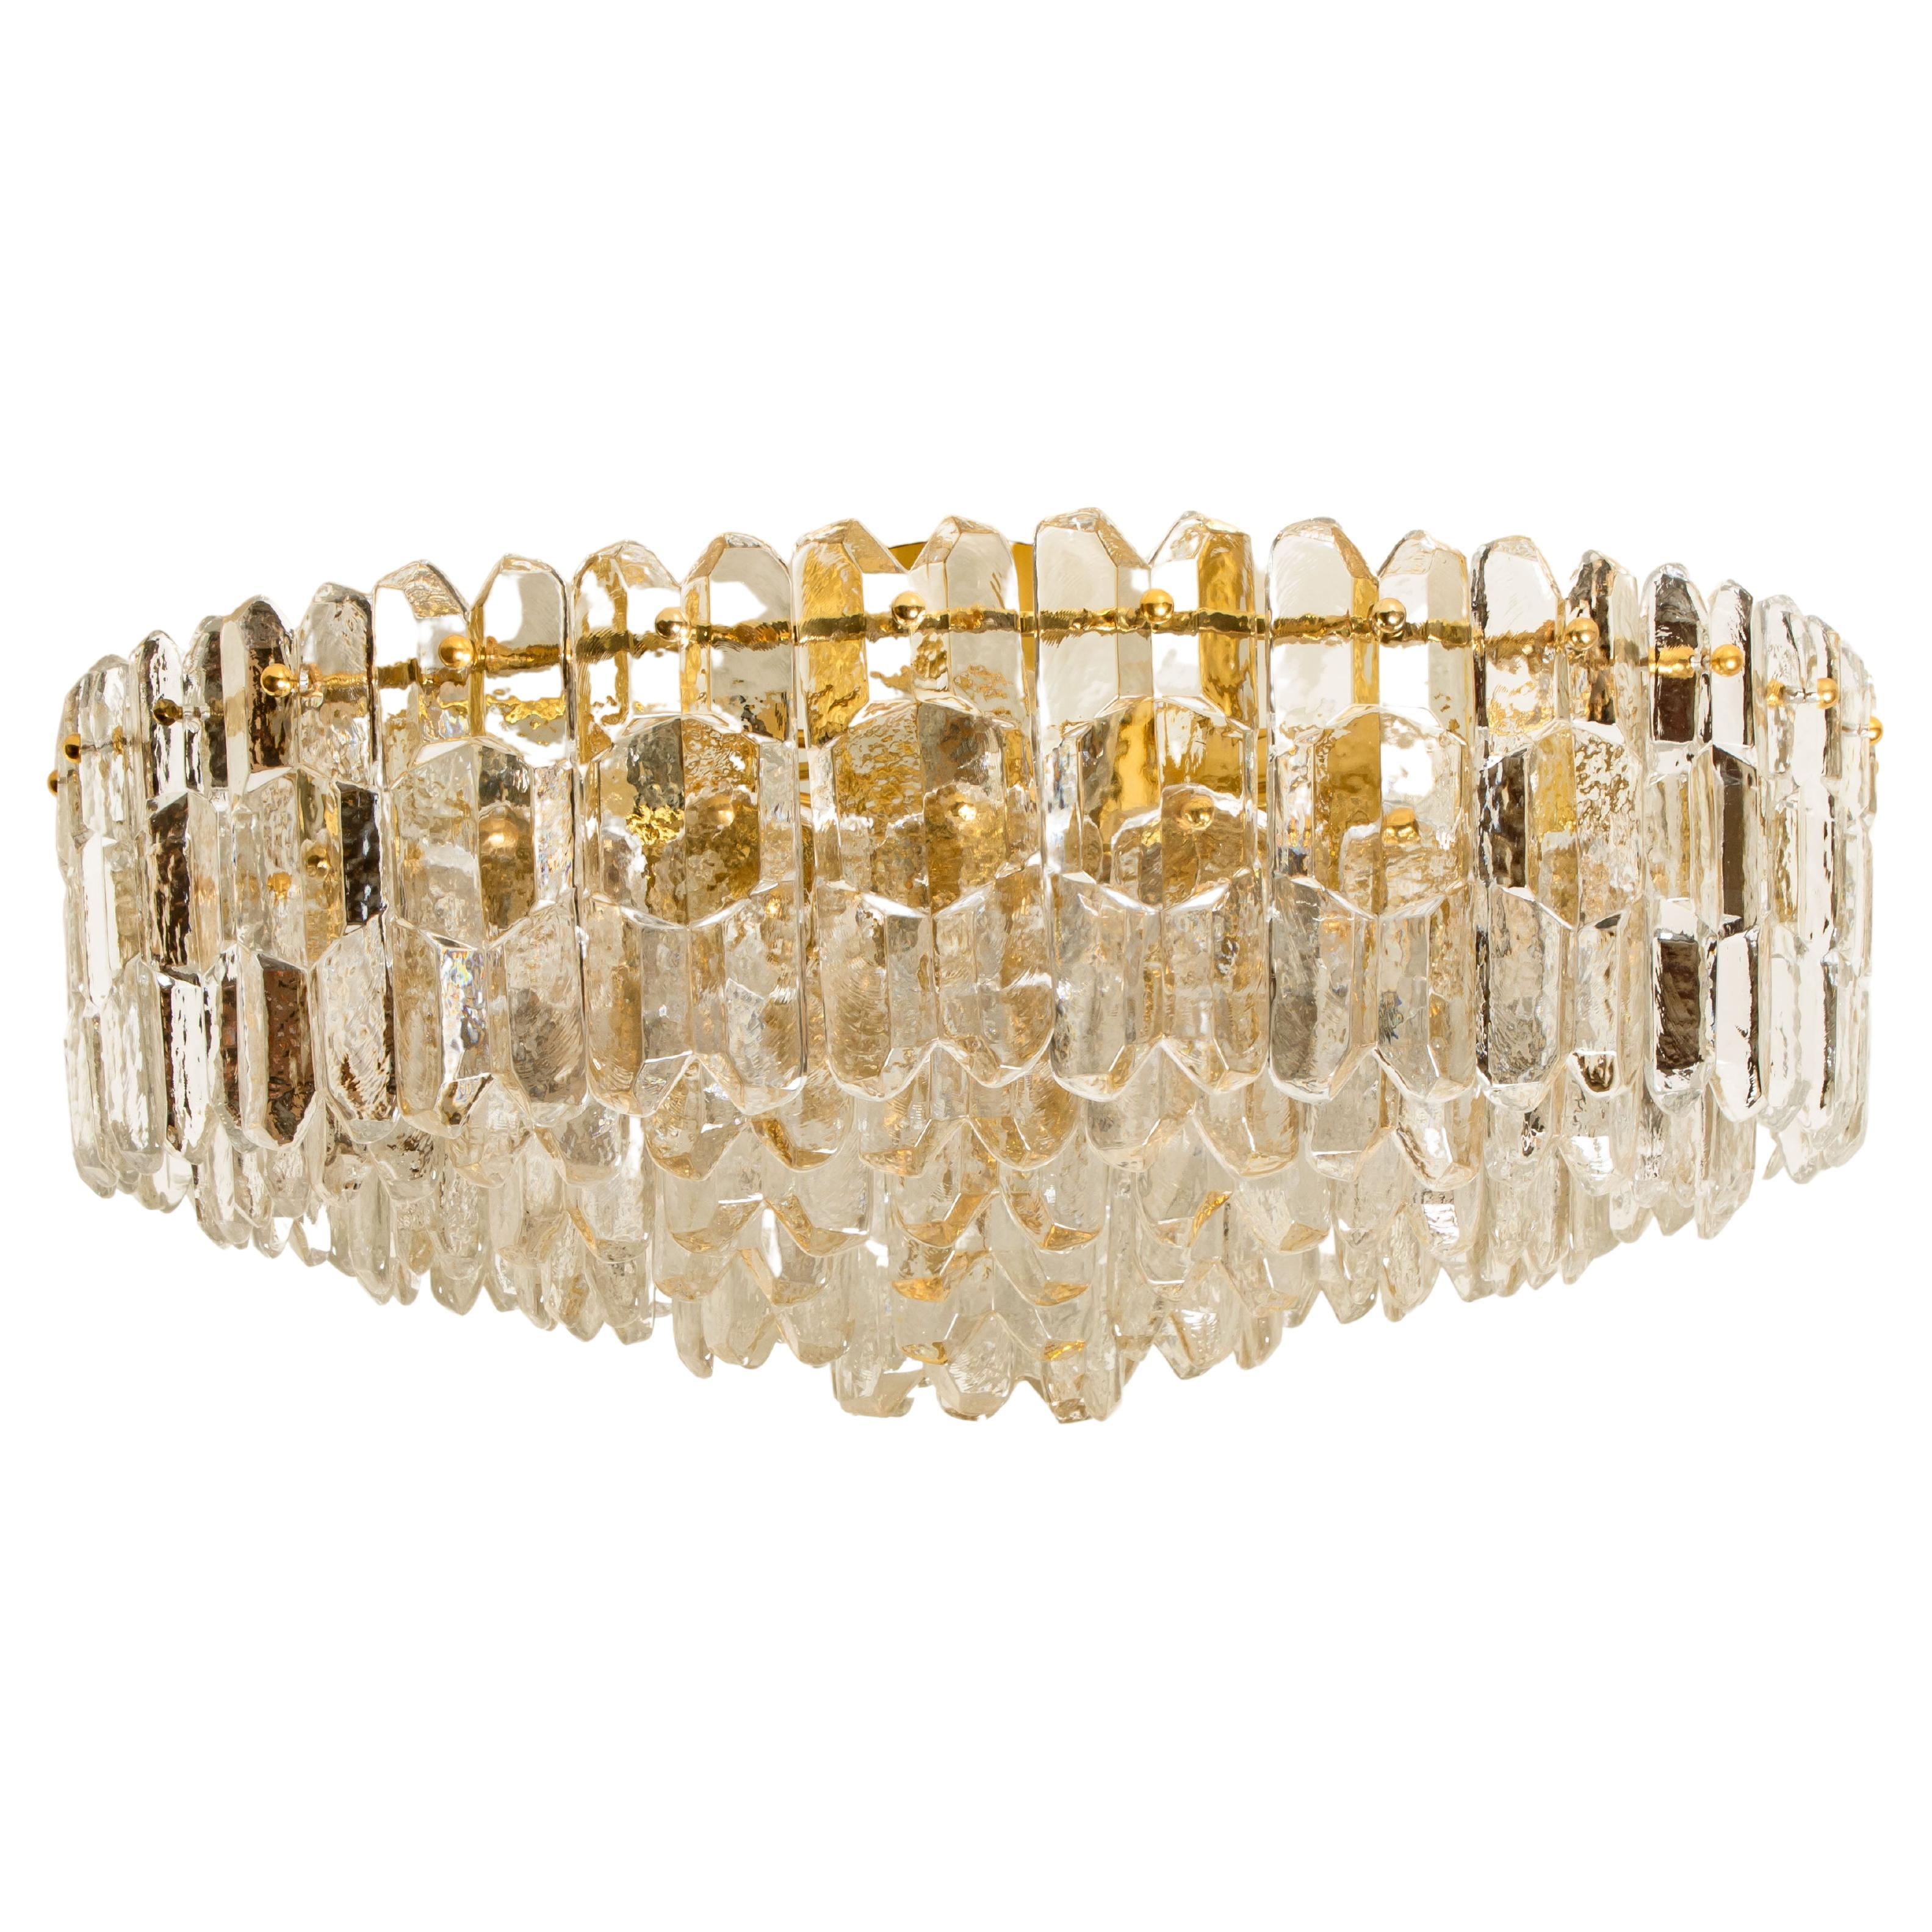 1 of the 2 exquisite 24-carat gold-plated brass and clear brilliant glass 'Palazzo' light fixture by J.T. Kalmar, Vienna, Austria, manufactured in circa 1970 (late 1960s and early 1970s). High end piece. Beautiful craftsmanship from the 20th